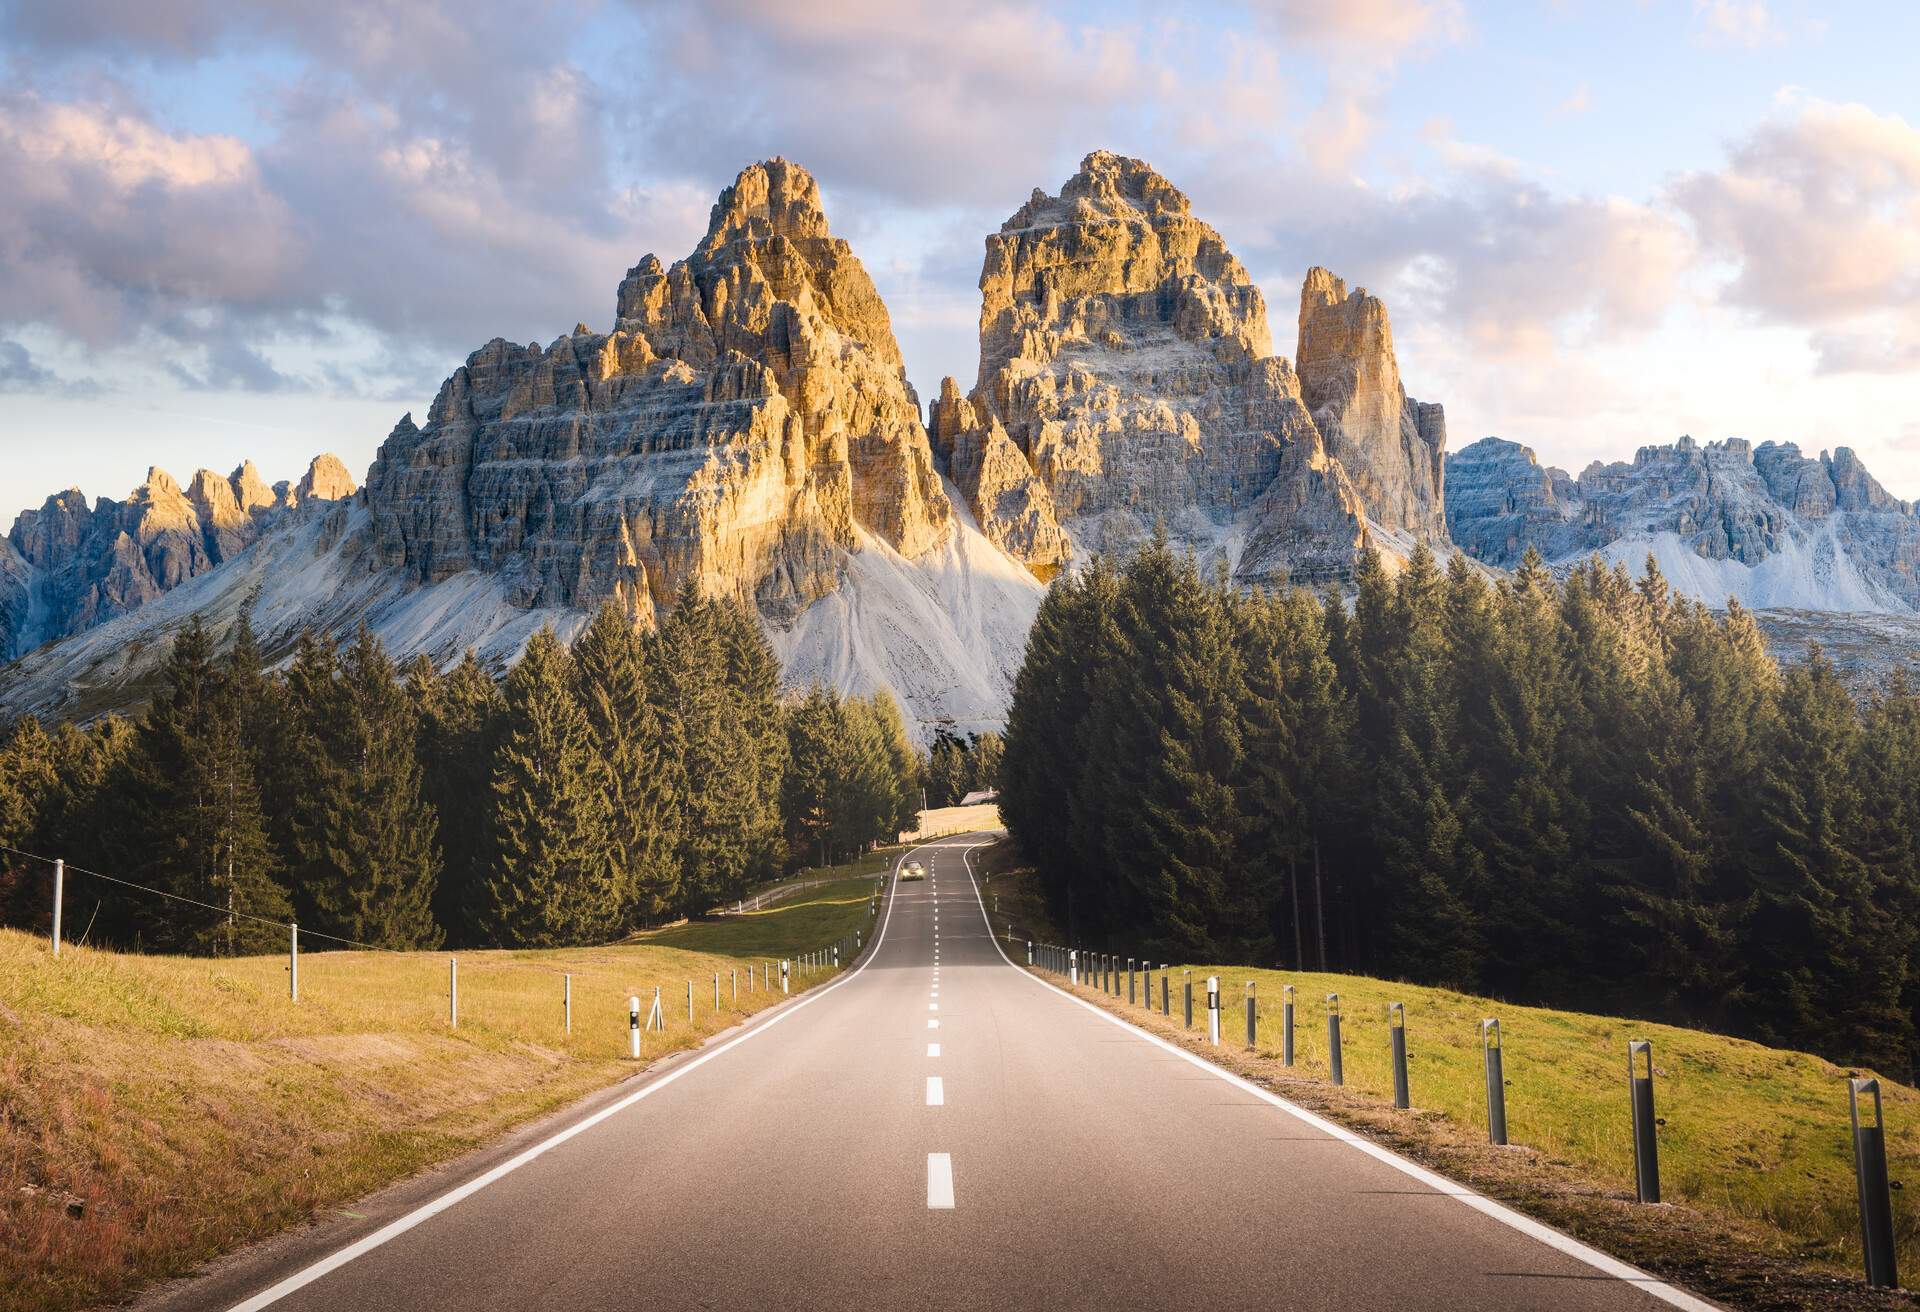 dest_italy_dolomites_lavaredo_theme_car_gettyimages-1247807601_universal_within-usage-period_82972